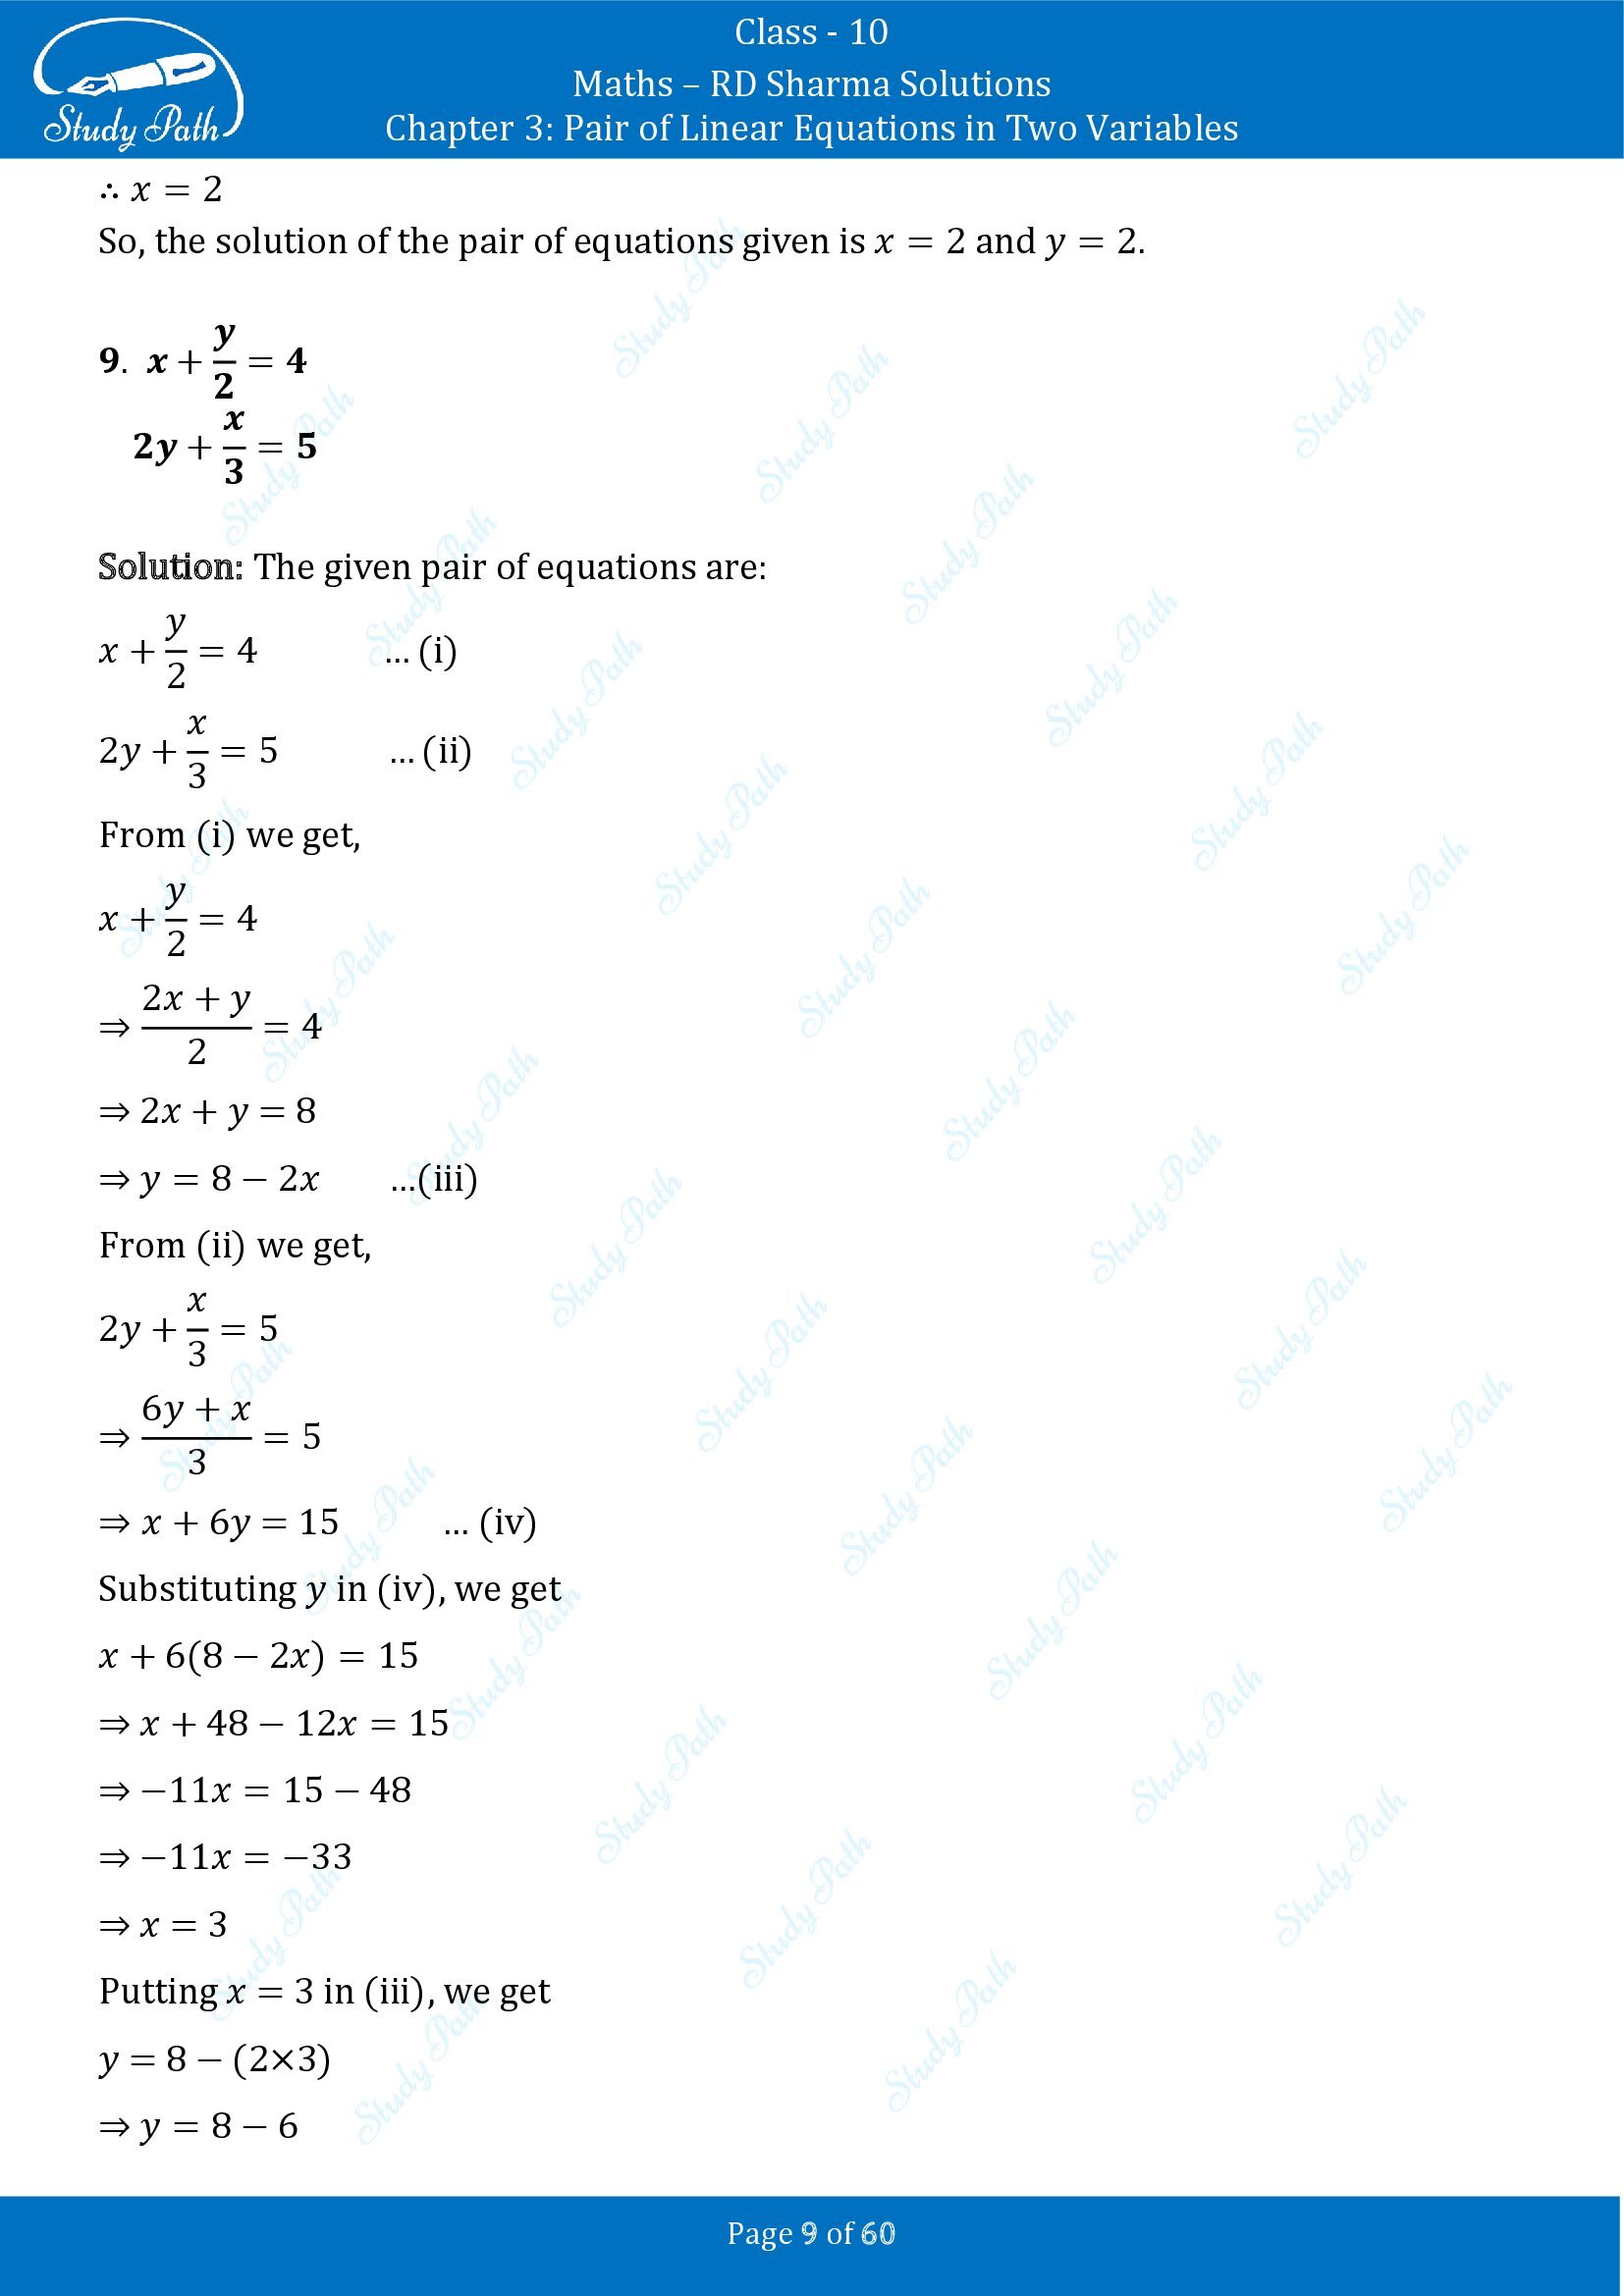 RD Sharma Solutions Class 10 Chapter 3 Pair of Linear Equations in Two Variables Exercise 3.3 00009